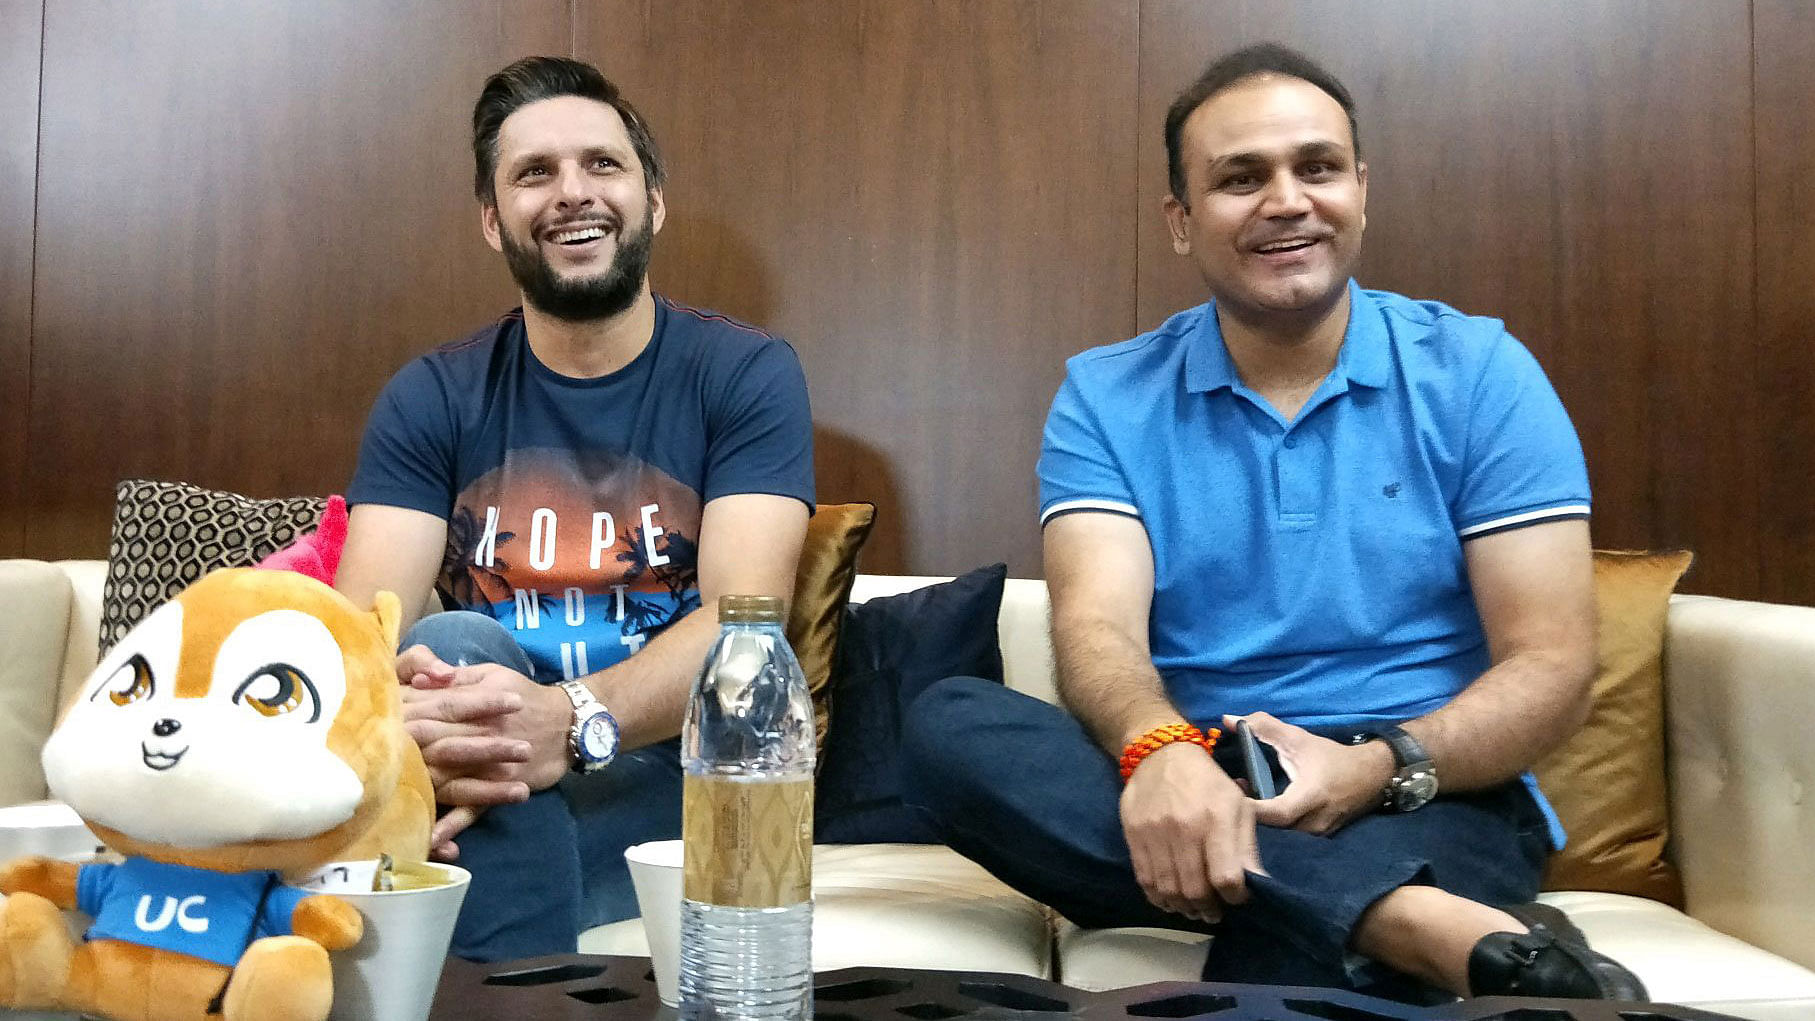 Virender Sehwag and Shahid Afridi on their favourite opponents, superstitions and more.